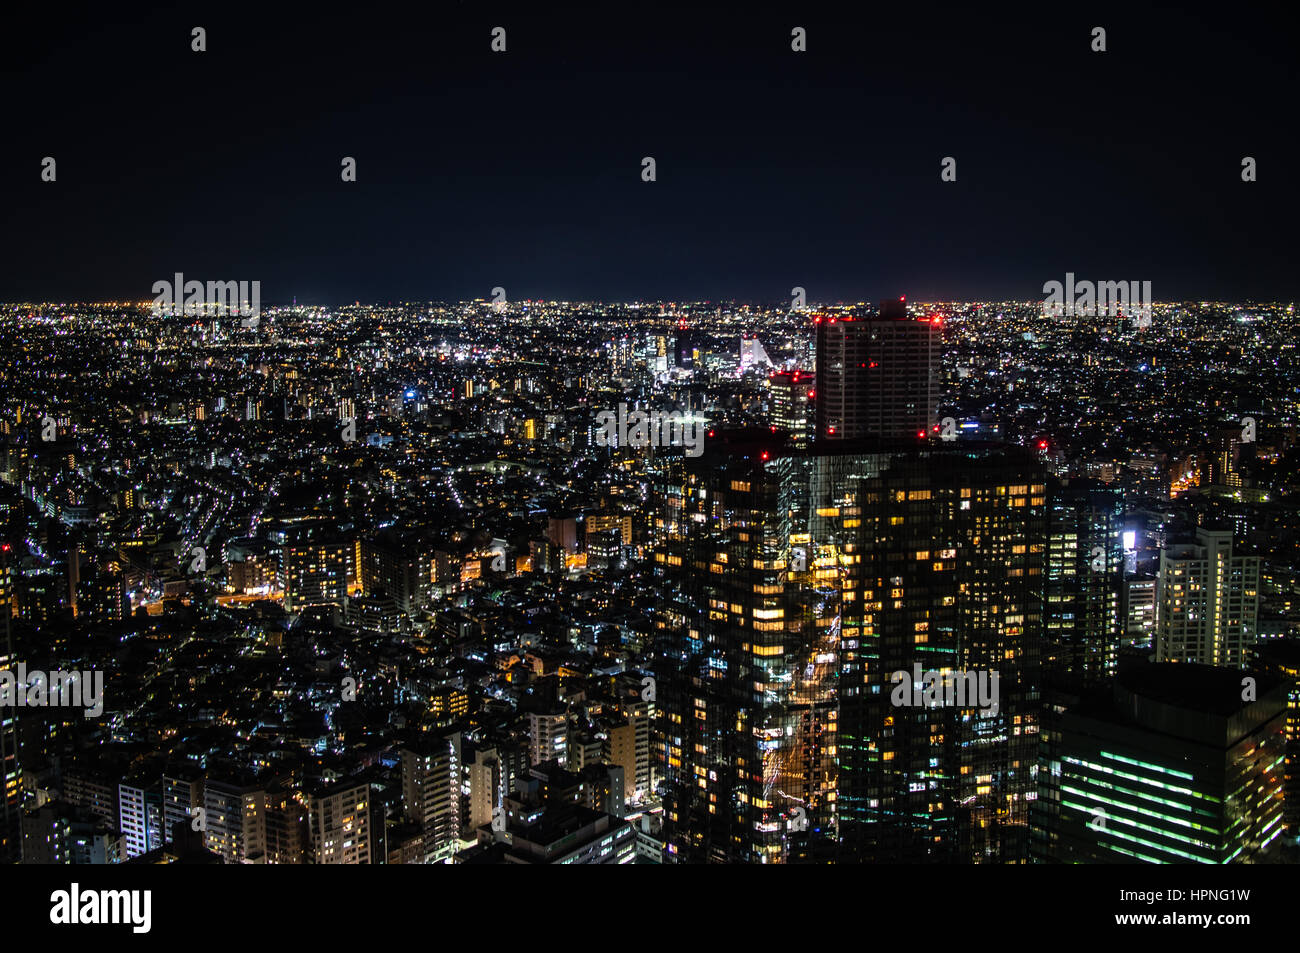 A view of Tokyo at night. Stock Photo